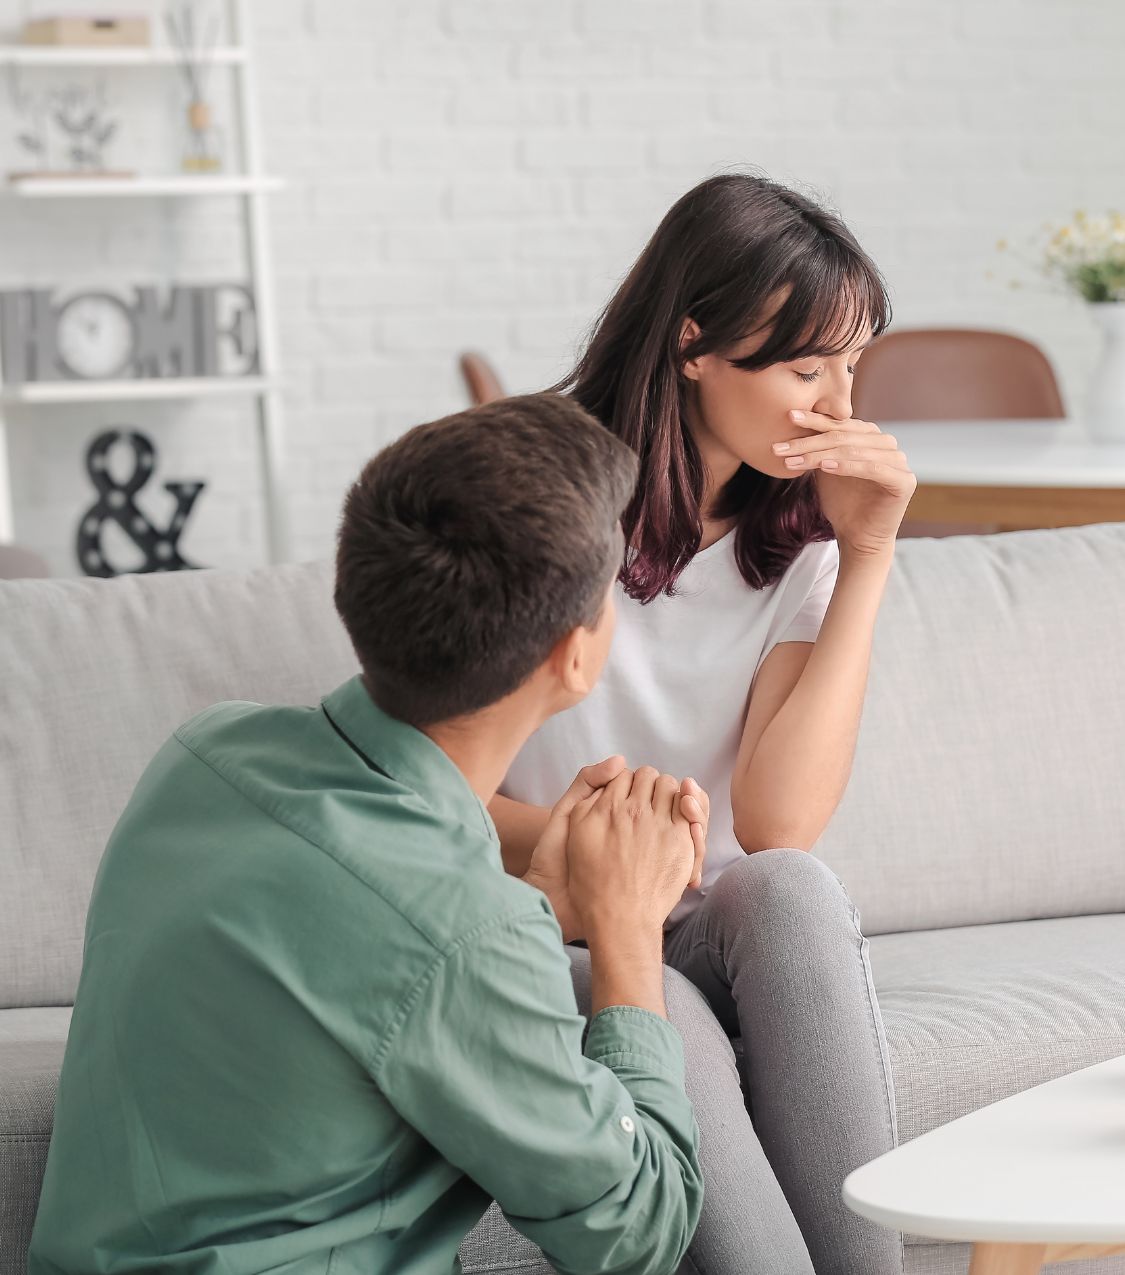 Man kneels beside a sad woman. Infidelity guilt impacts joint recovery & partner responses vary. Book a free consultation with Relationship Experts for support in overcoming infidelity guilt. Serving couples in the United States, Colorado, California, Washington, North Carolina, South Carolina, New York, Illinois, Canada, United Kingdom, Australia & worldwide.